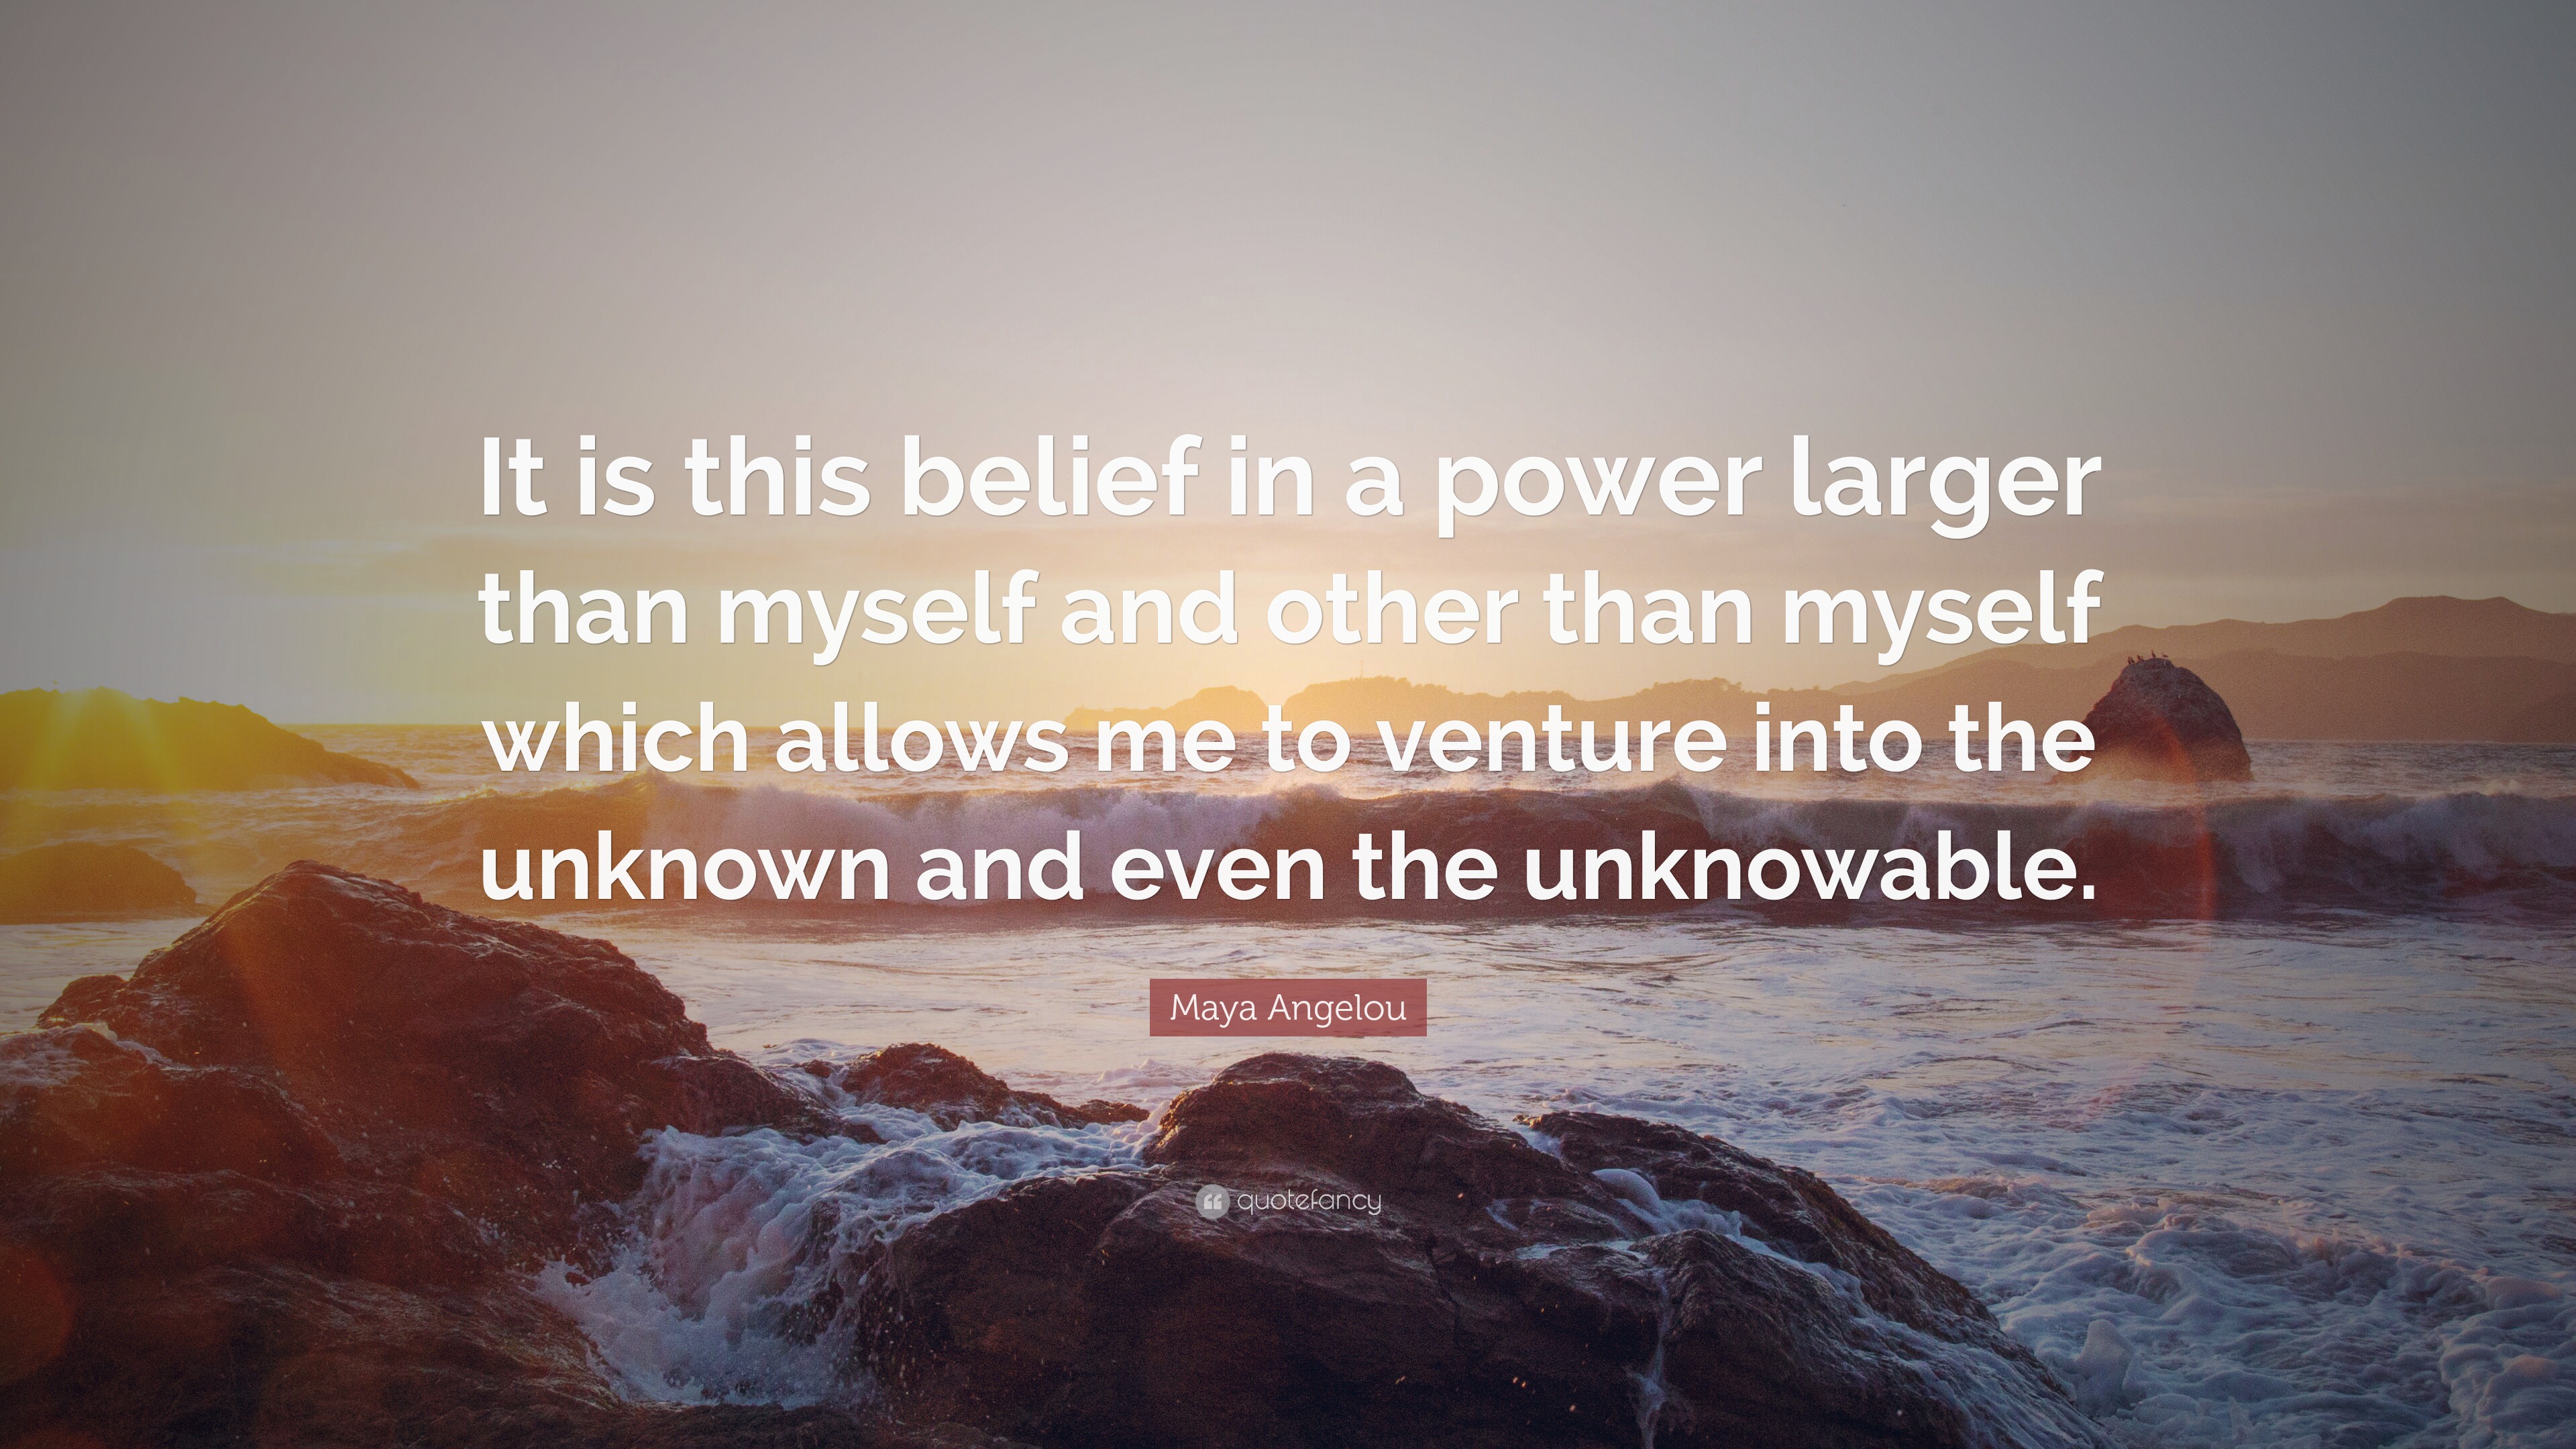 Maya Angelou Quote: “It is this belief in a power larger than myself ...